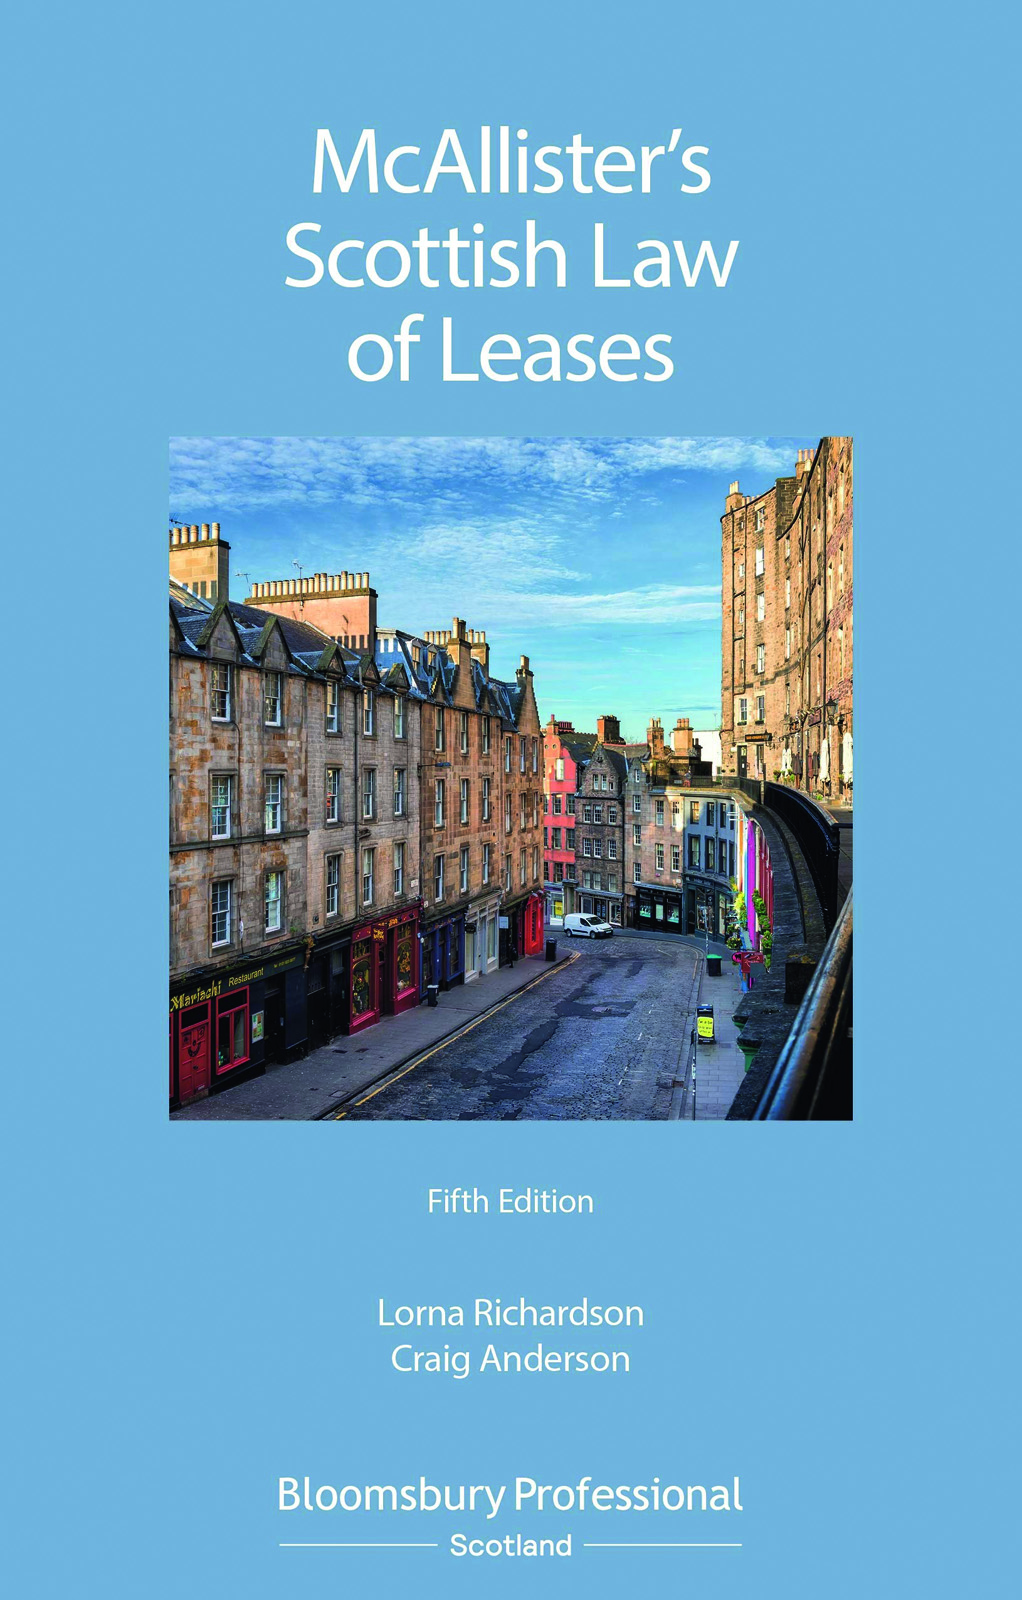 McAllister's Scottish Law of Leases fifth edition